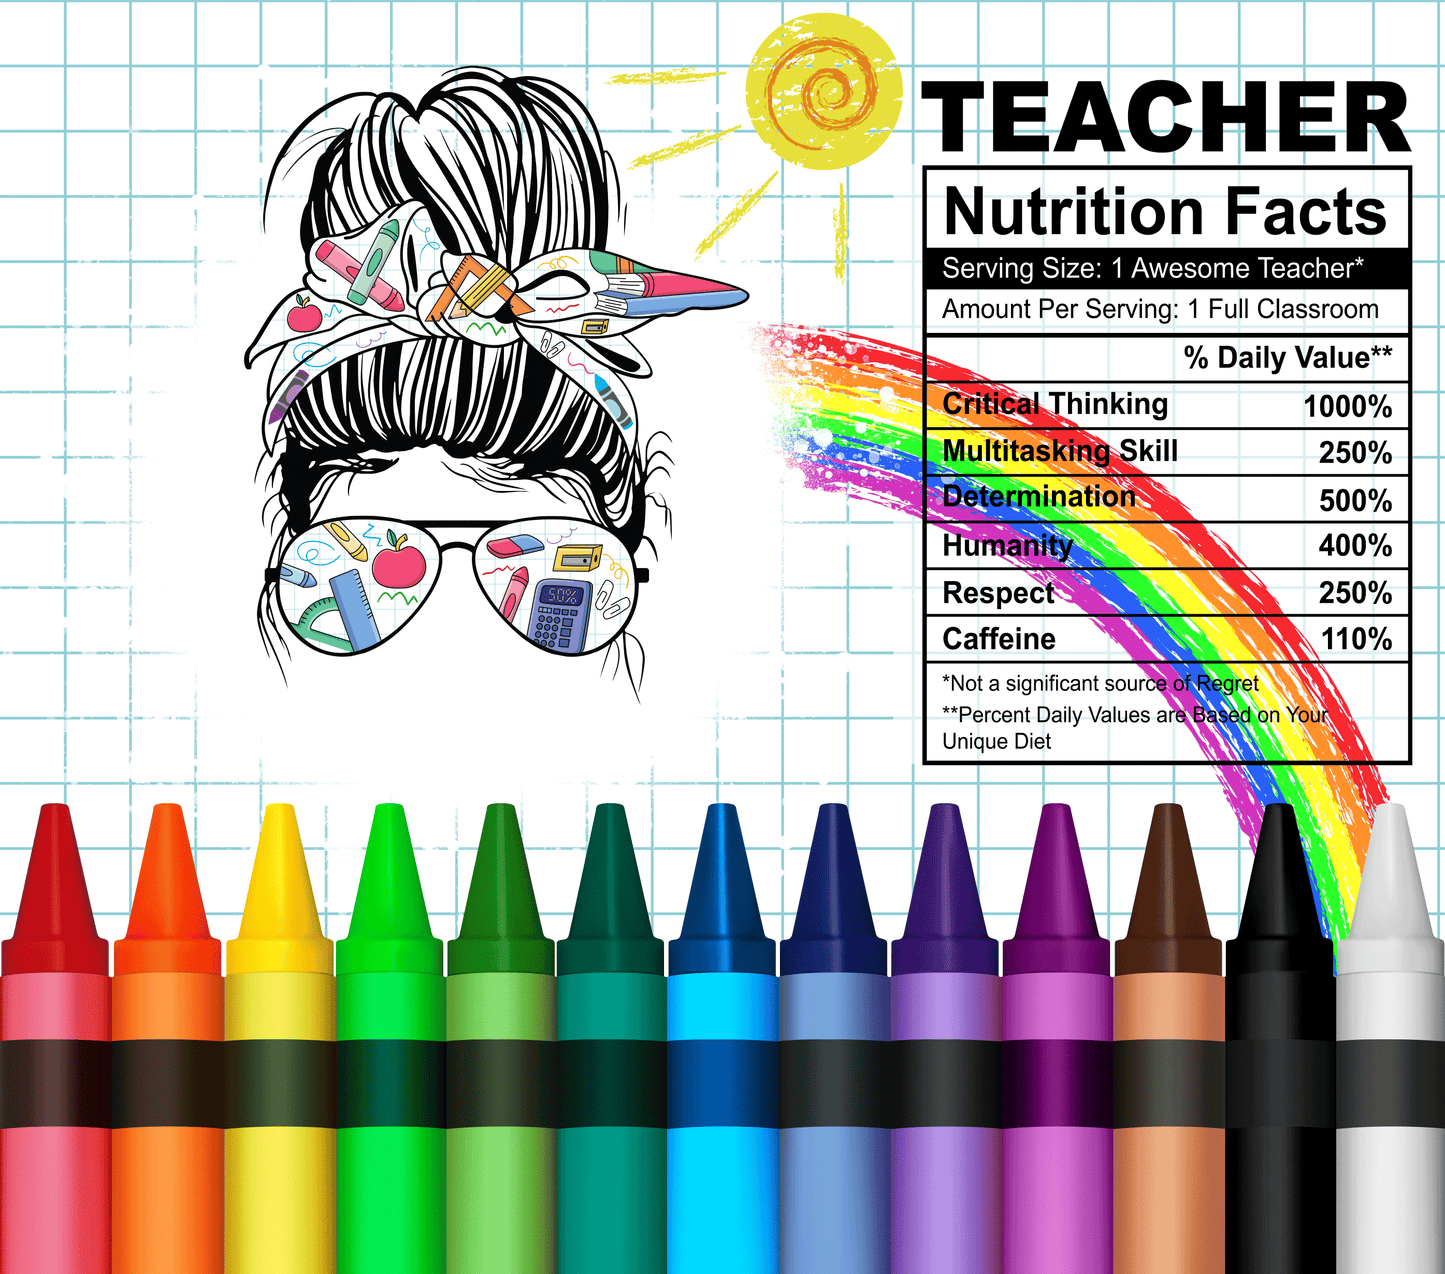 20 oz Stainless Steel Tumbler With That Iconic Gal Wearing Sunglasses With Crayons Along The Bottom Edge And A Fun Nutritional Chart On Being A Teacher.  Stainless Steel Double-Wall   Vacuum Insulated  Clear Sliding Classic Lid   Clear Straw  BPA FREE  Stays Cold 24+ hours & Warm 8 hours